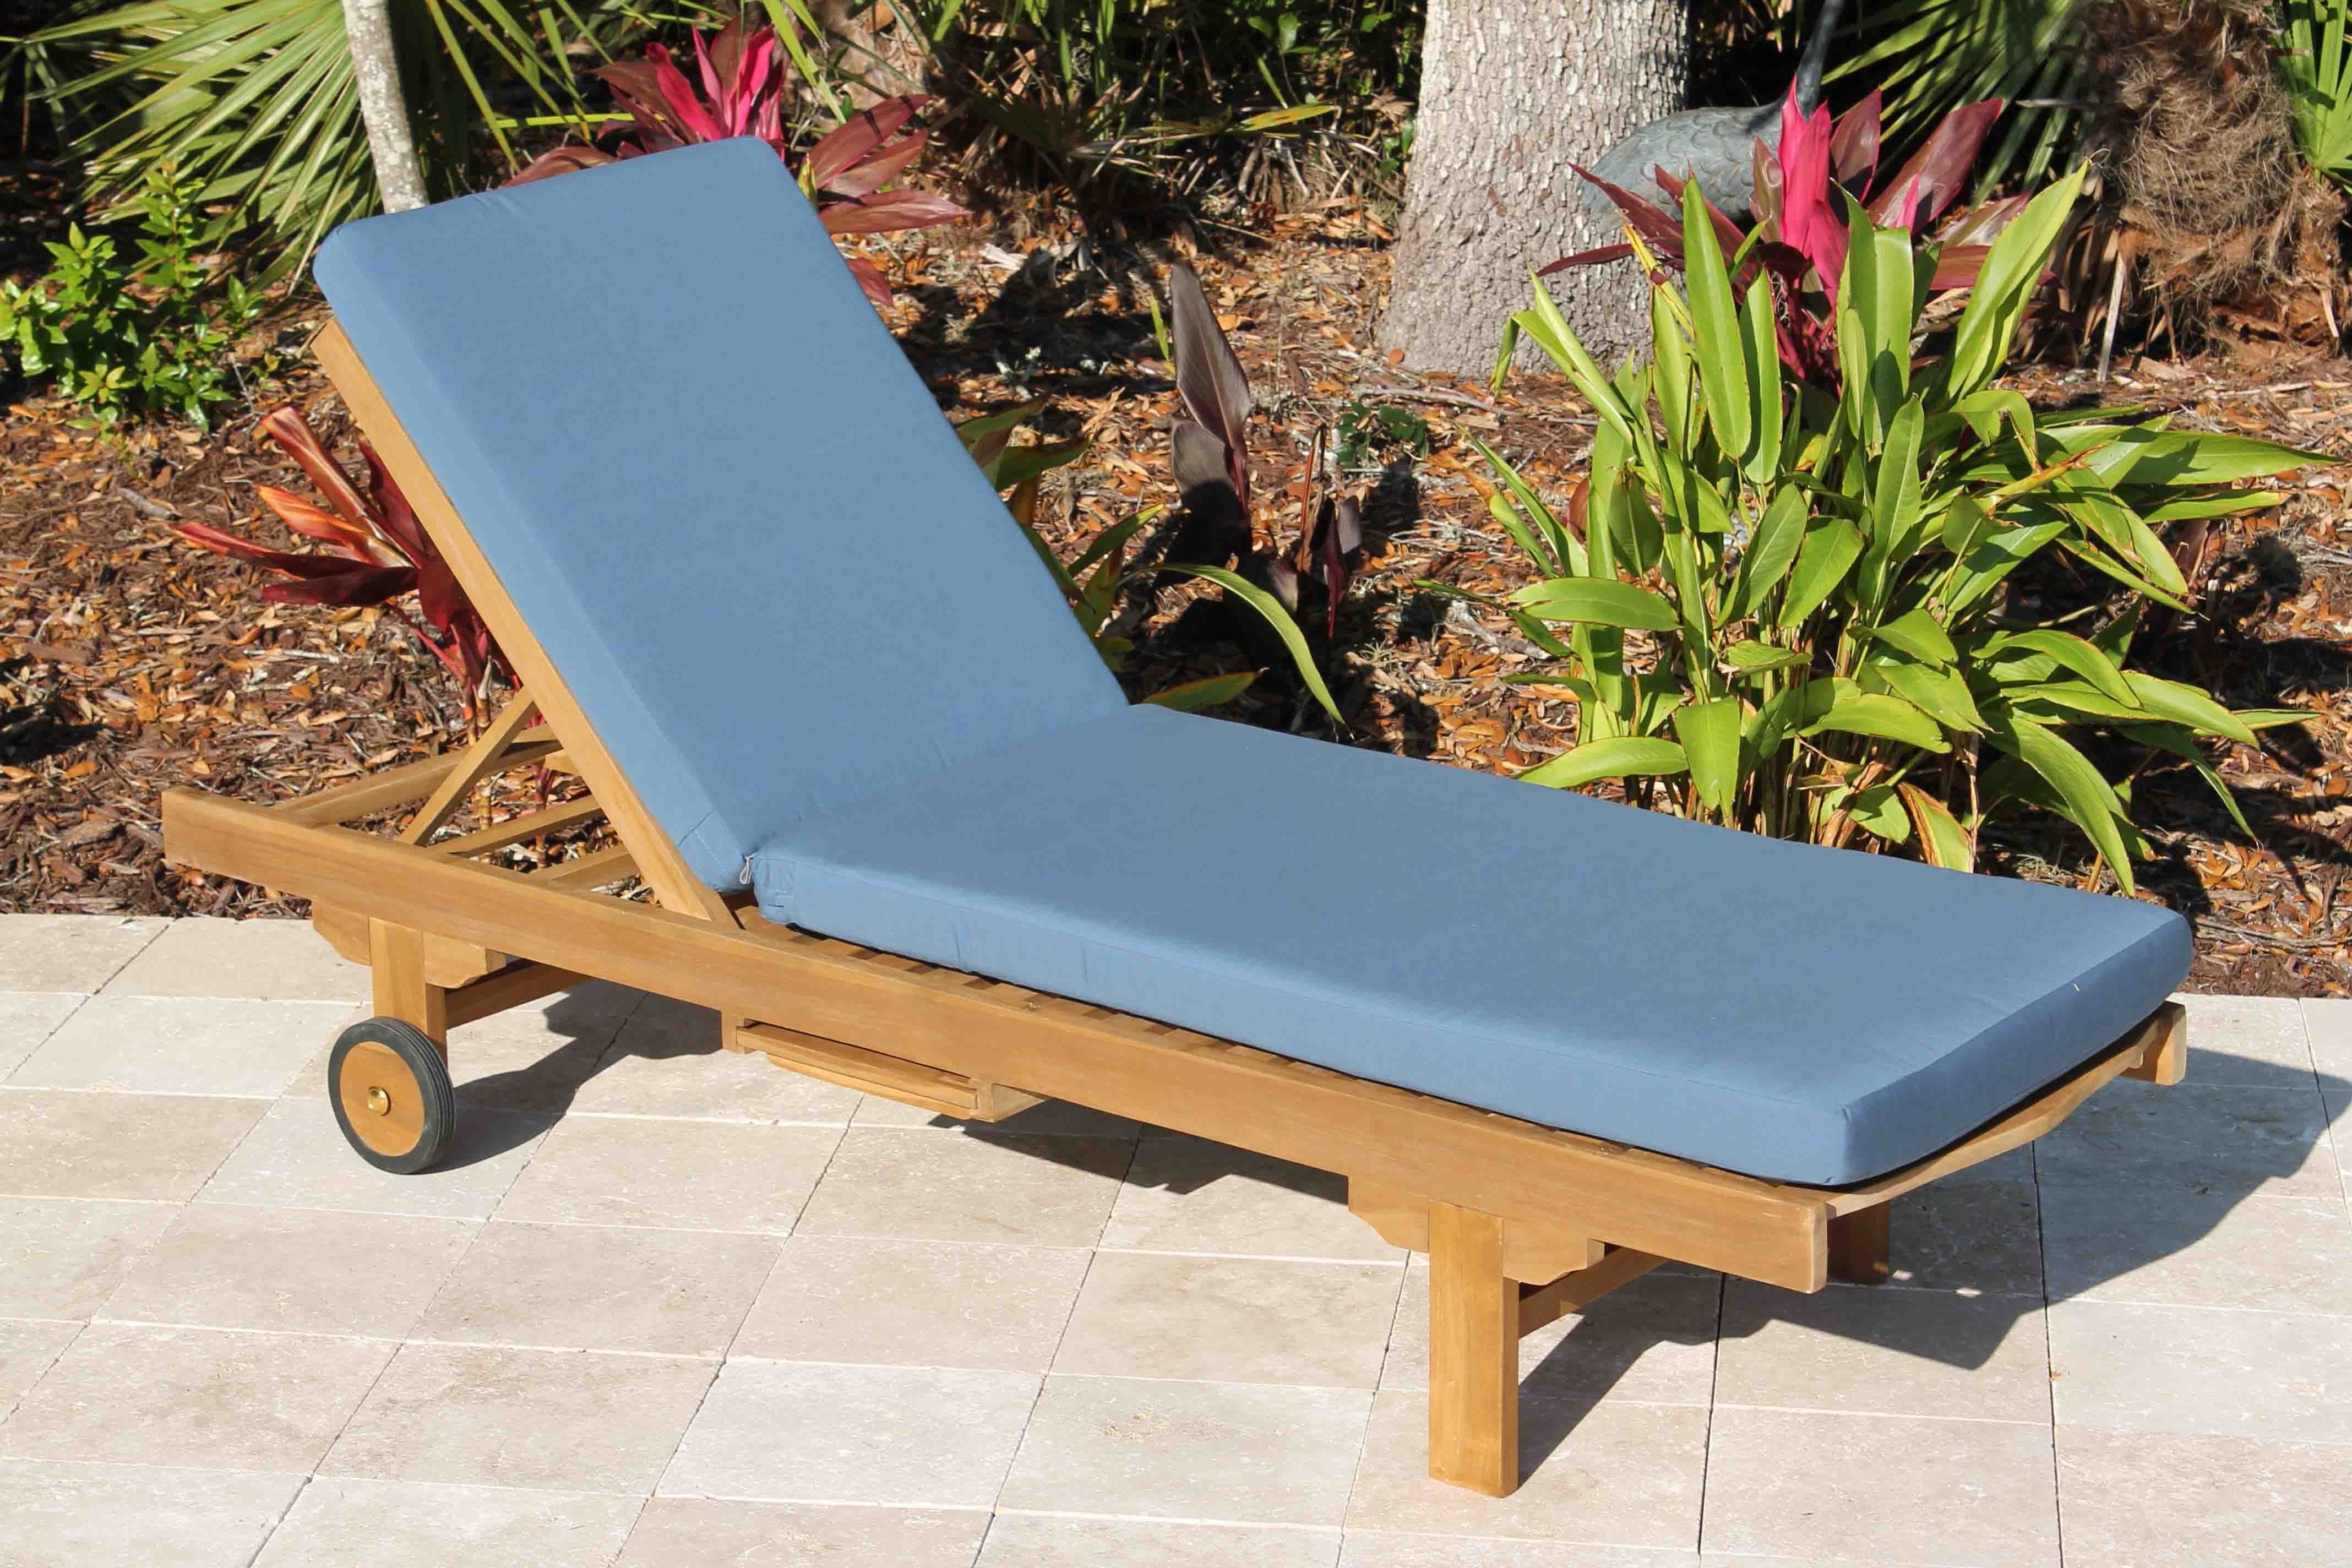 Most Recently Released Cushion For Chaise Lounge Chair • Lounge Chairs Ideas Pertaining To Extra Wide Outdoor Chaise Lounge Chairs (View 11 of 15)